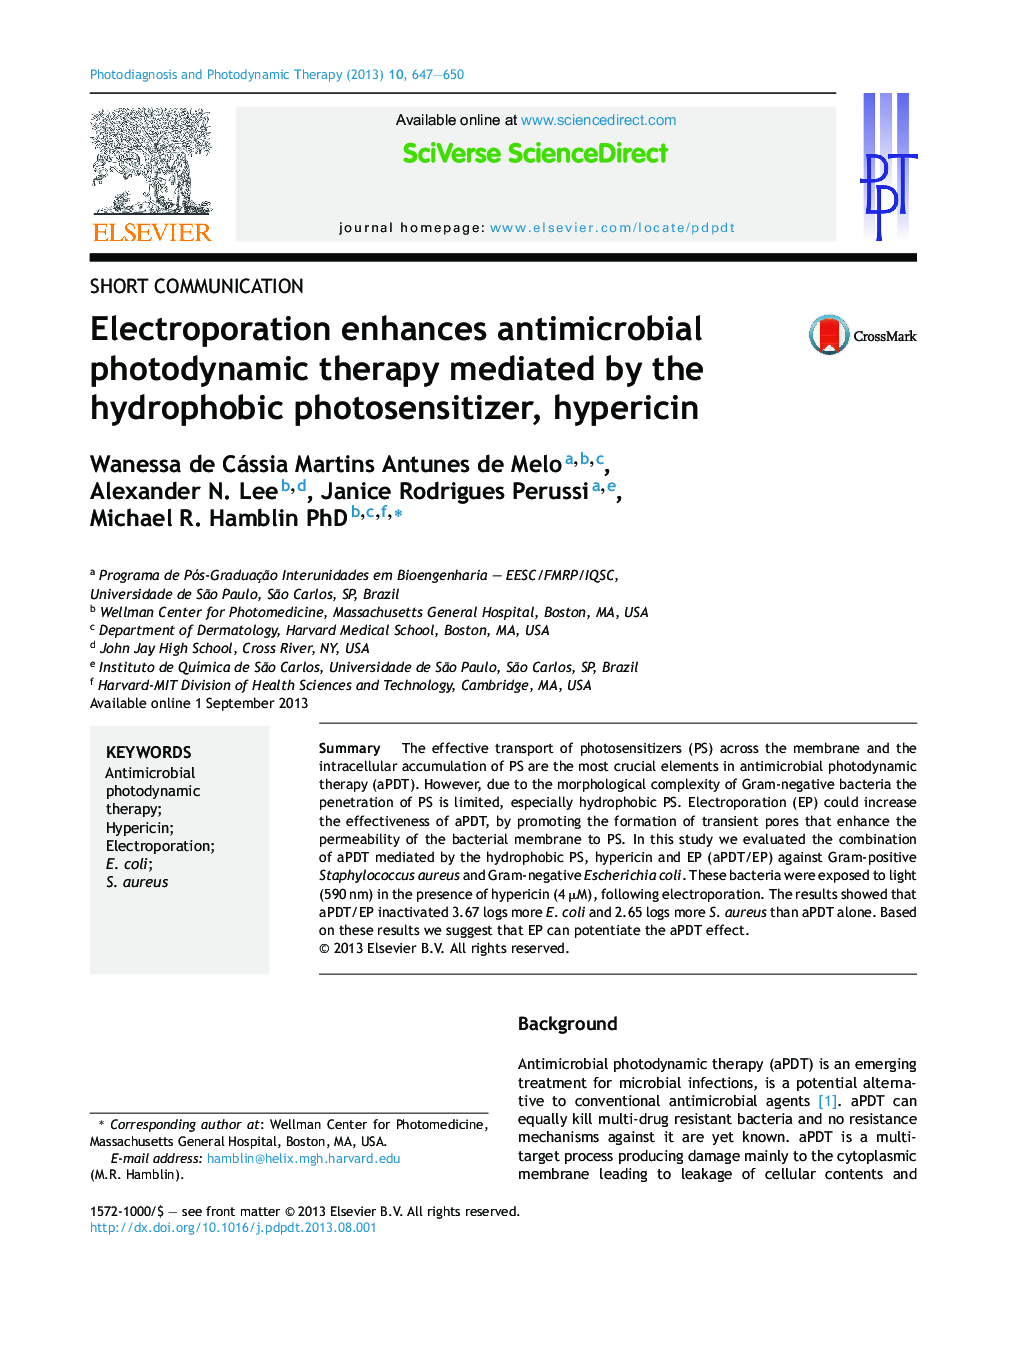 Electroporation enhances antimicrobial photodynamic therapy mediated by the hydrophobic photosensitizer, hypericin